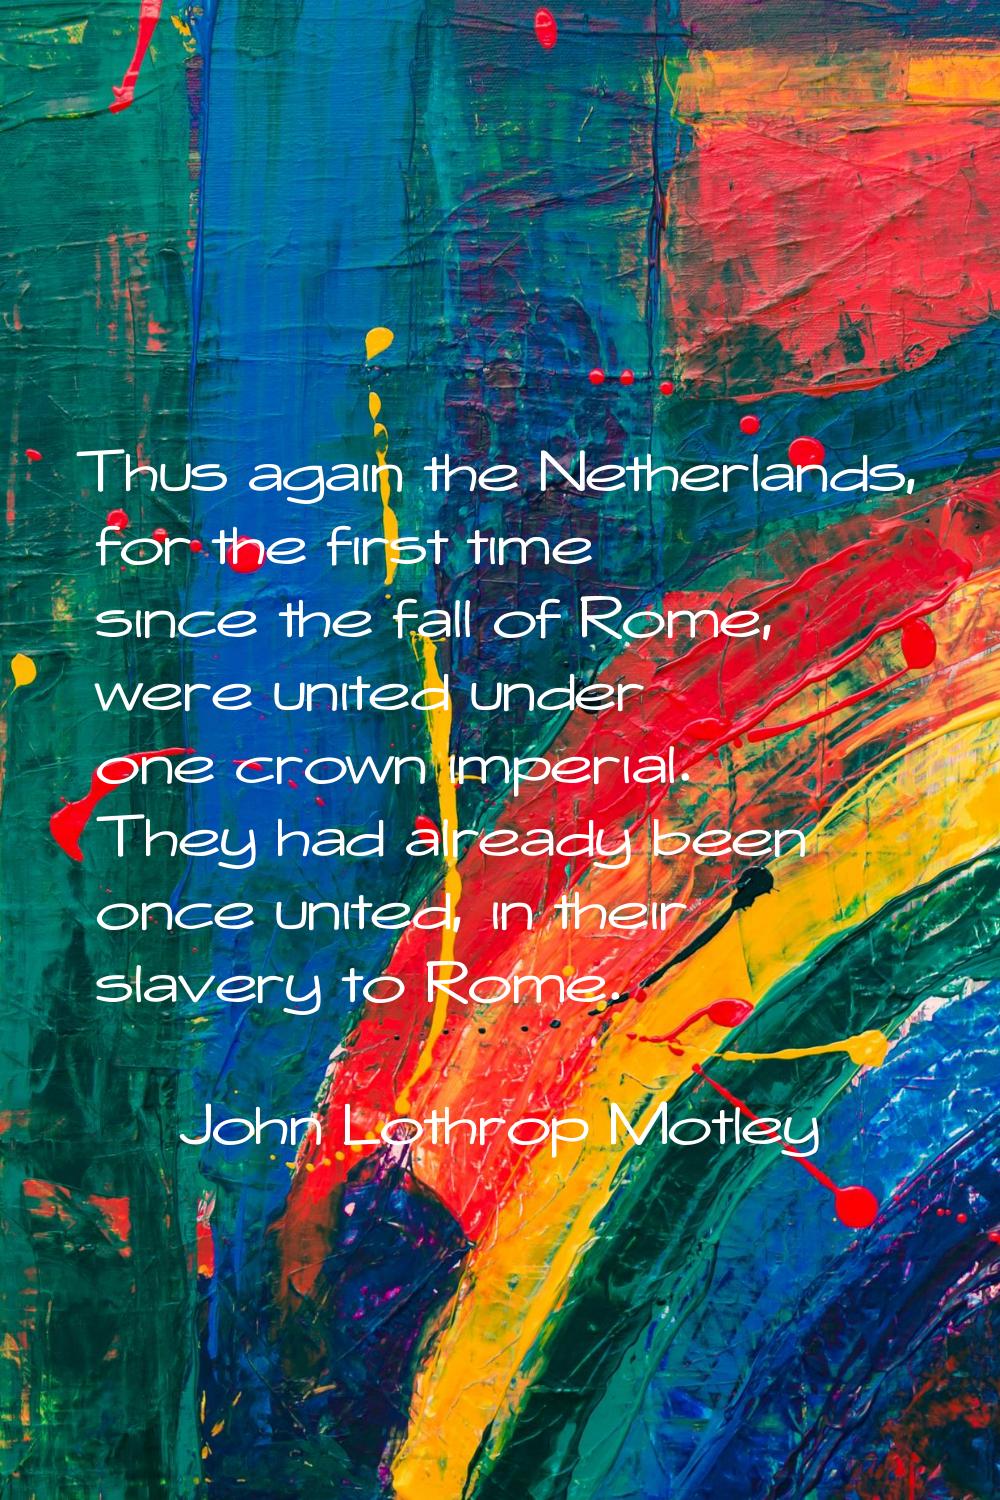 Thus again the Netherlands, for the first time since the fall of Rome, were united under one crown 